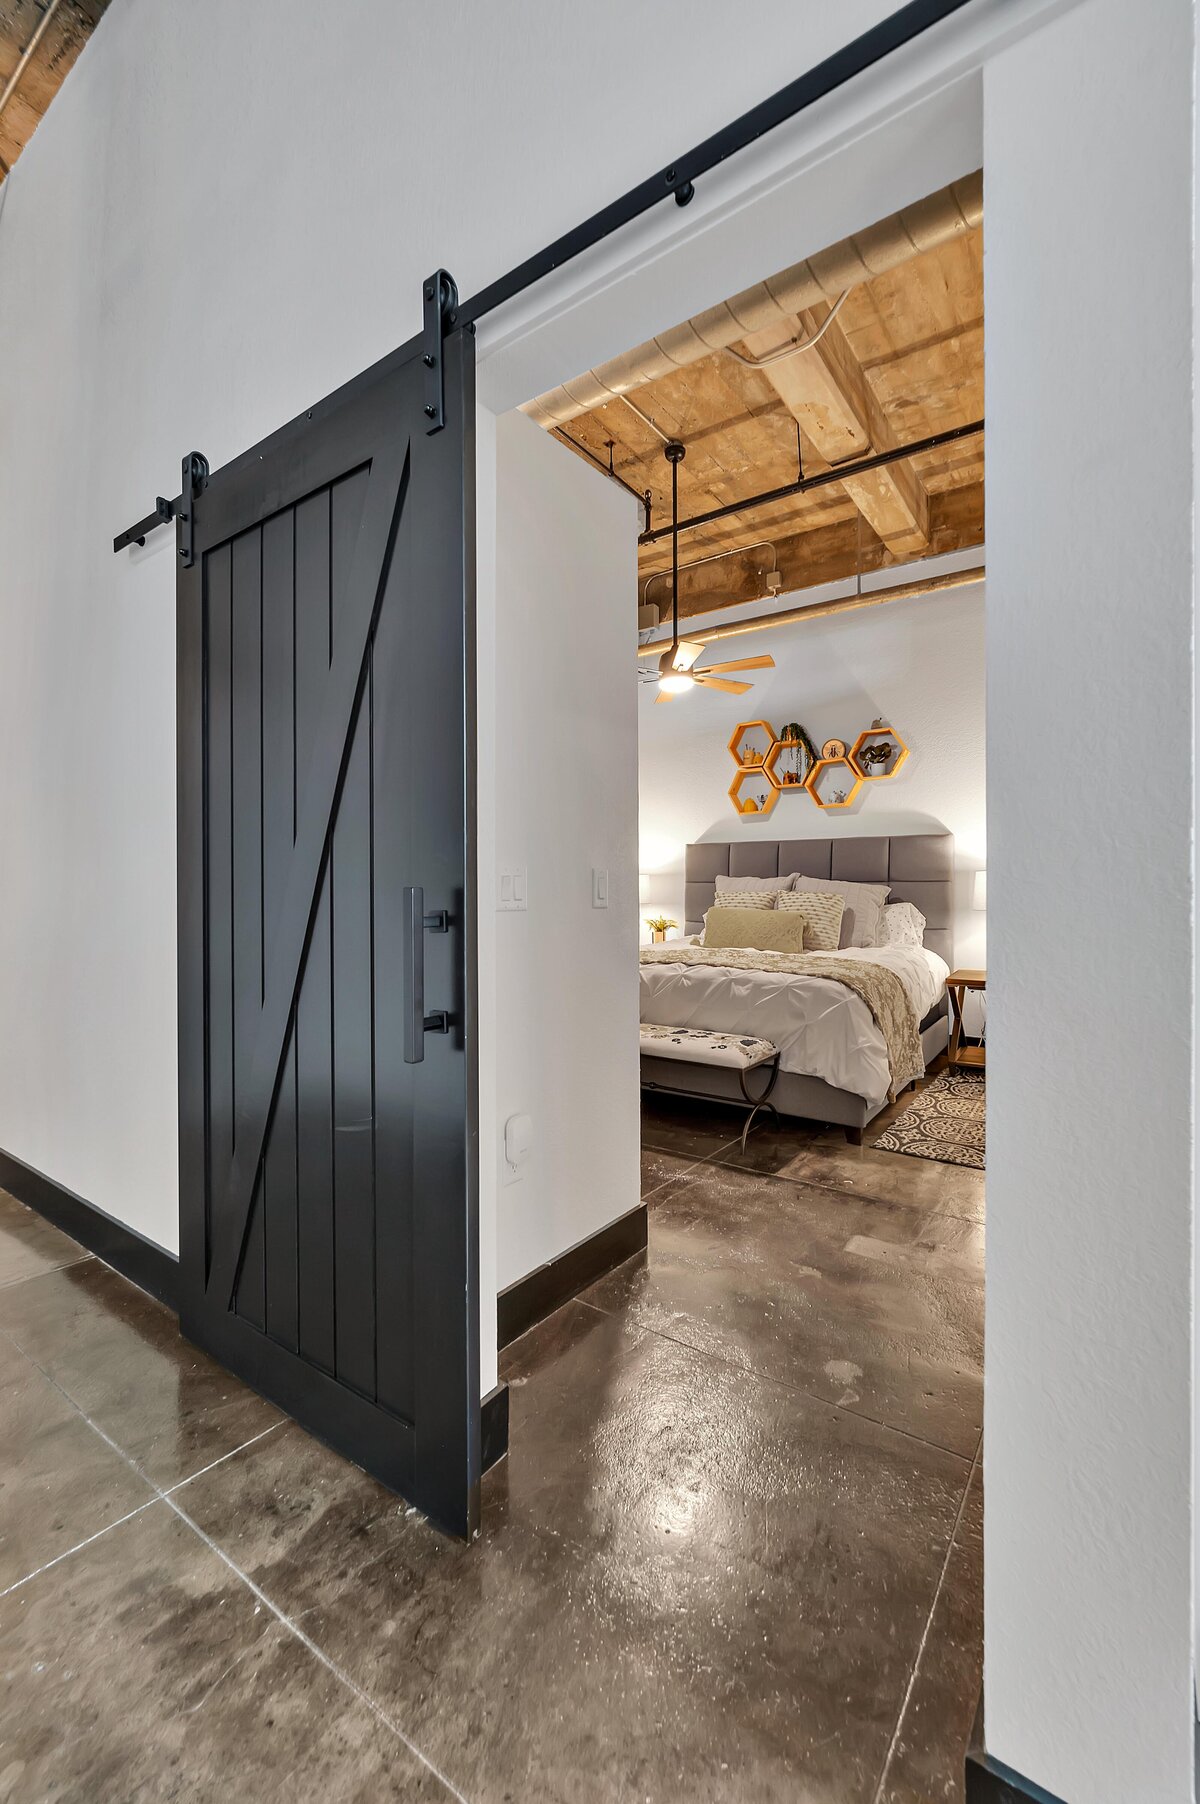 View of the master bedroom in this one-bedroom, one-bathroom vintage condo that sleeps 4 in the historic Behrens building in the heart of the Magnolia Silo District in downtown Waco, TX.